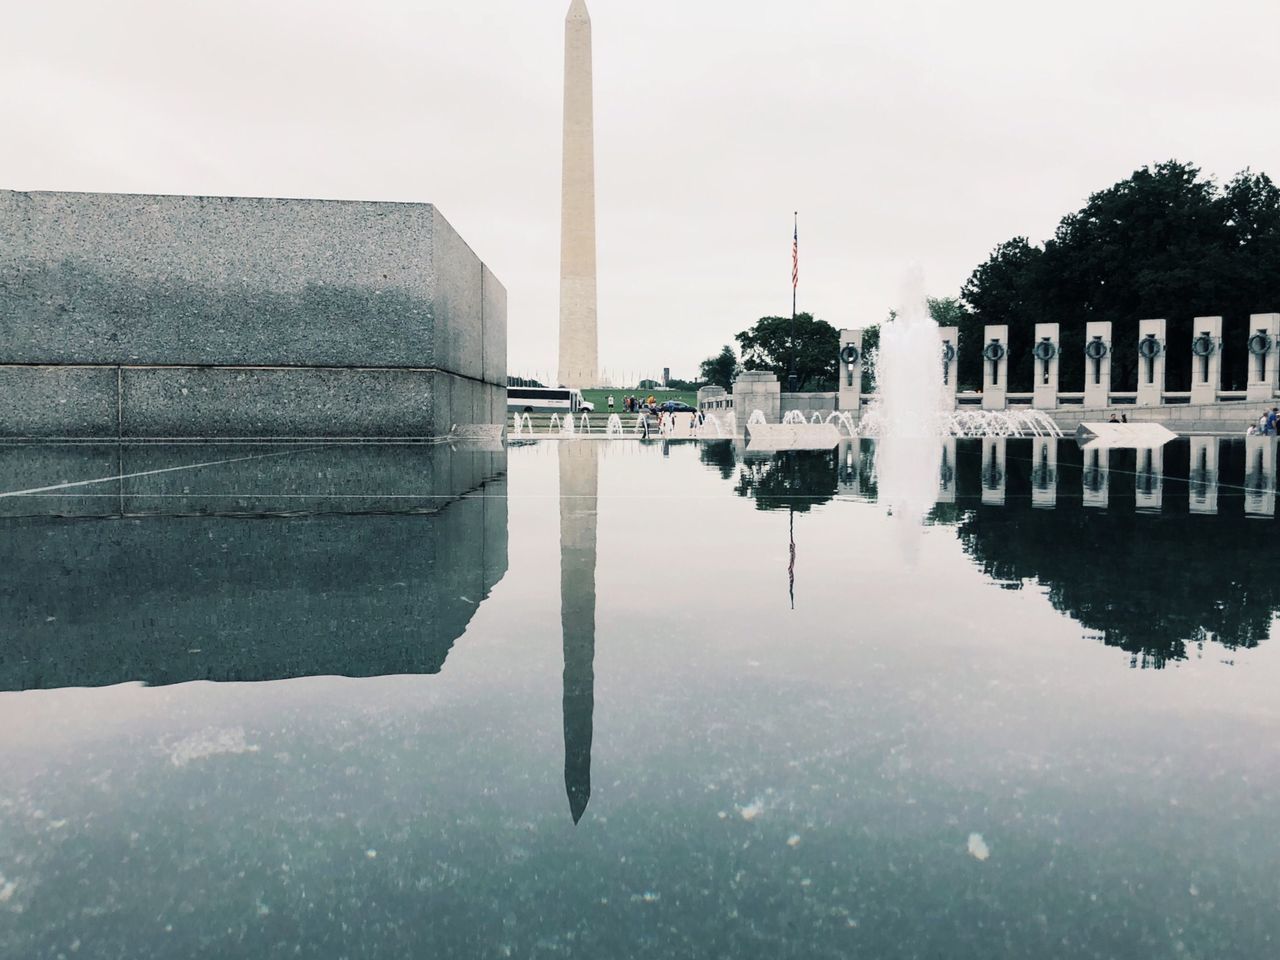 reflection, water, architecture, built structure, waterfront, building exterior, sky, nature, lake, day, travel destinations, standing water, symmetry, no people, tourism, history, the past, building, travel, outdoors, reflecting pool, architectural column